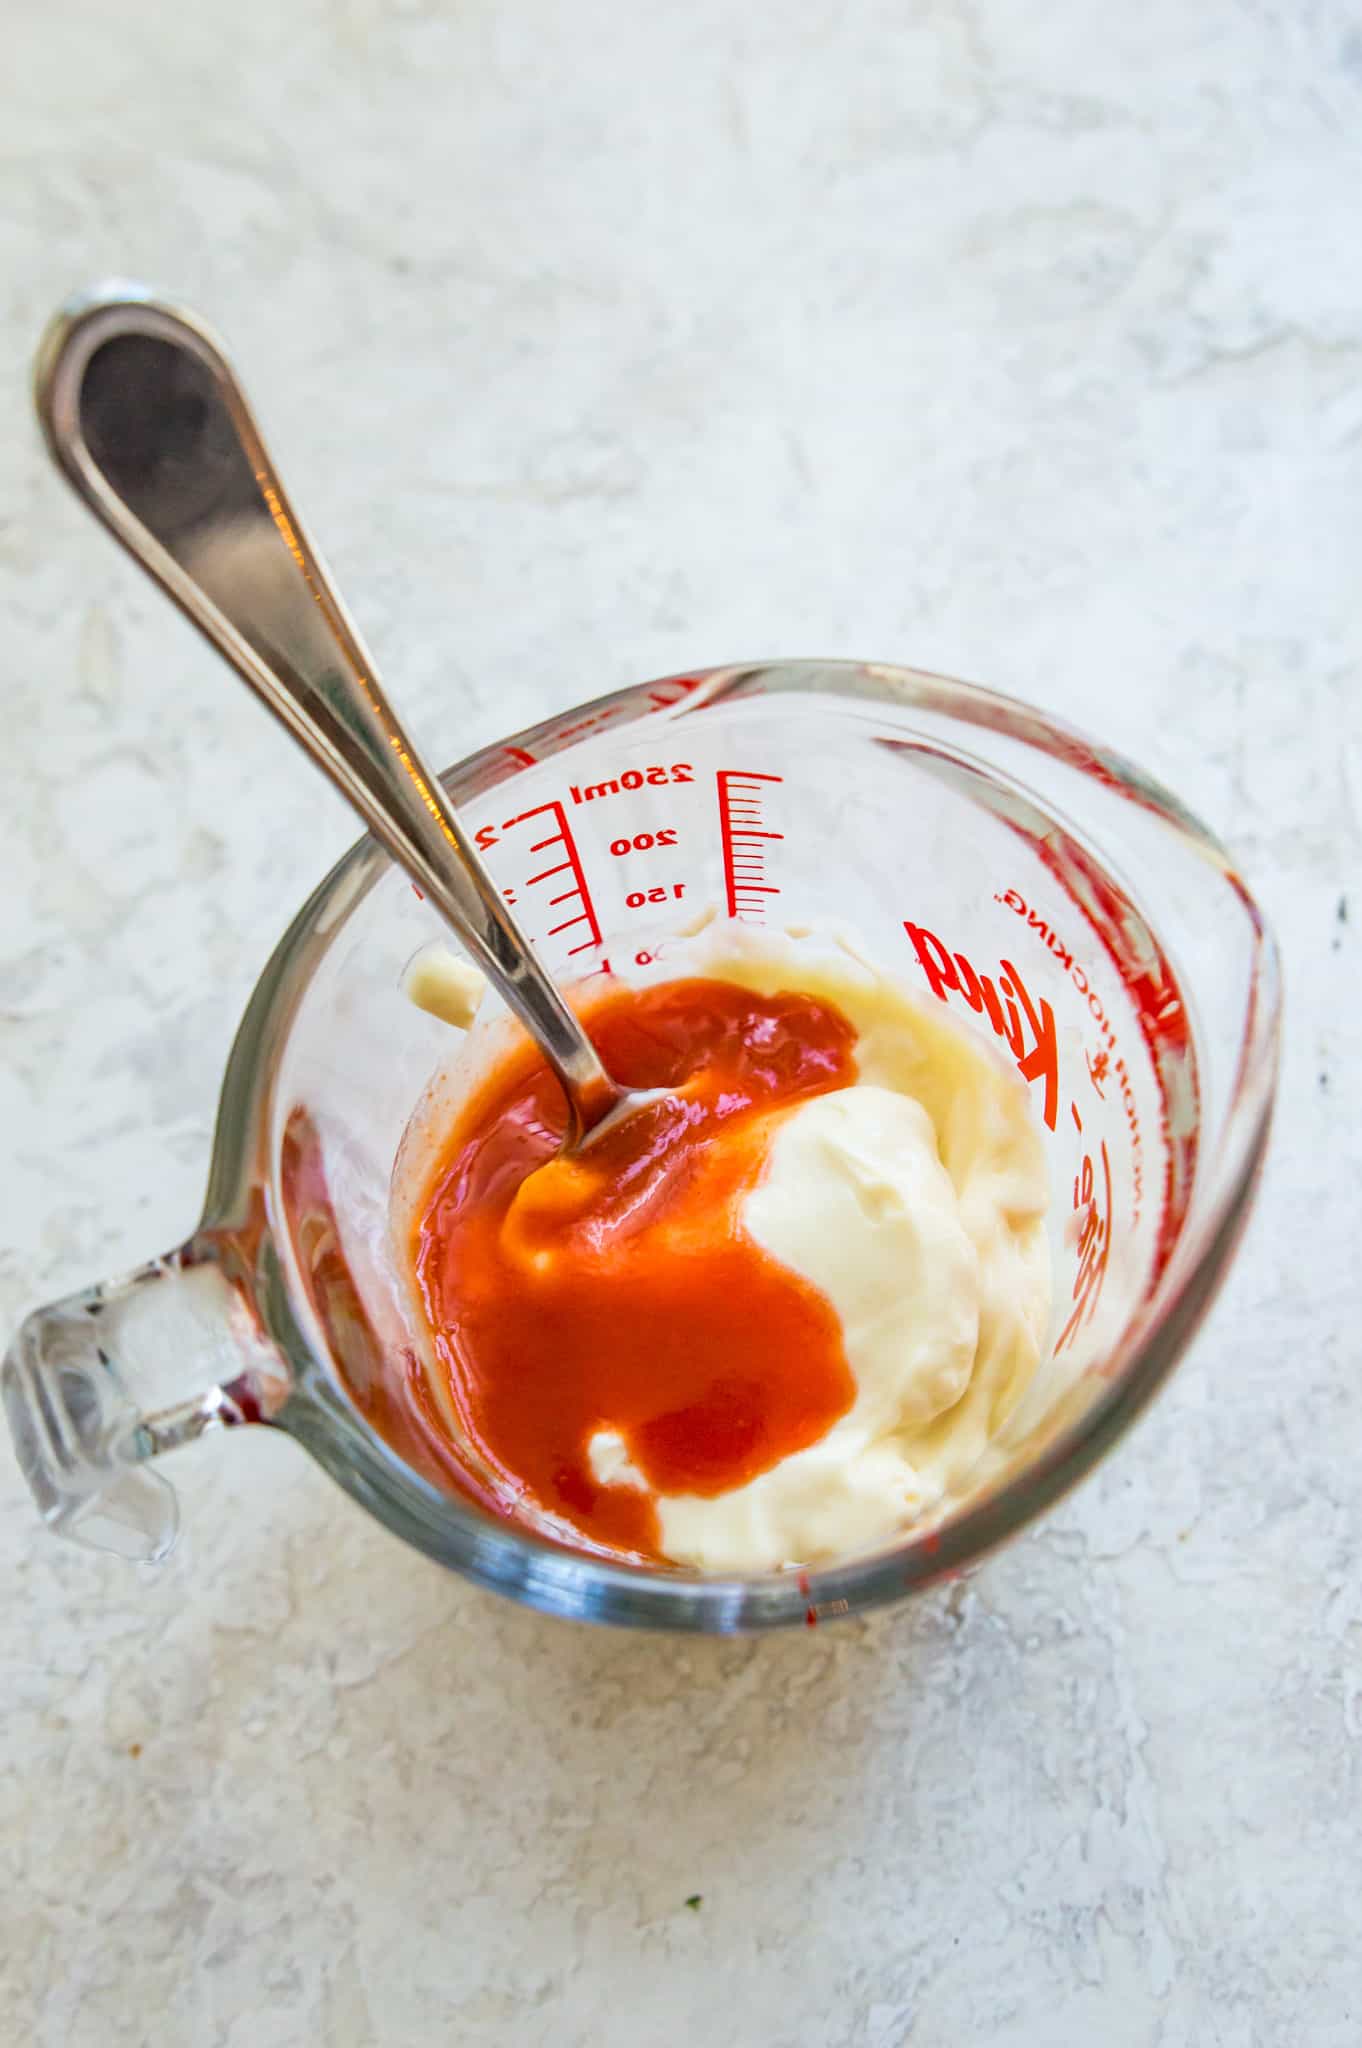 A measuring cup filled with ingredients for making vegan sriracha mayo